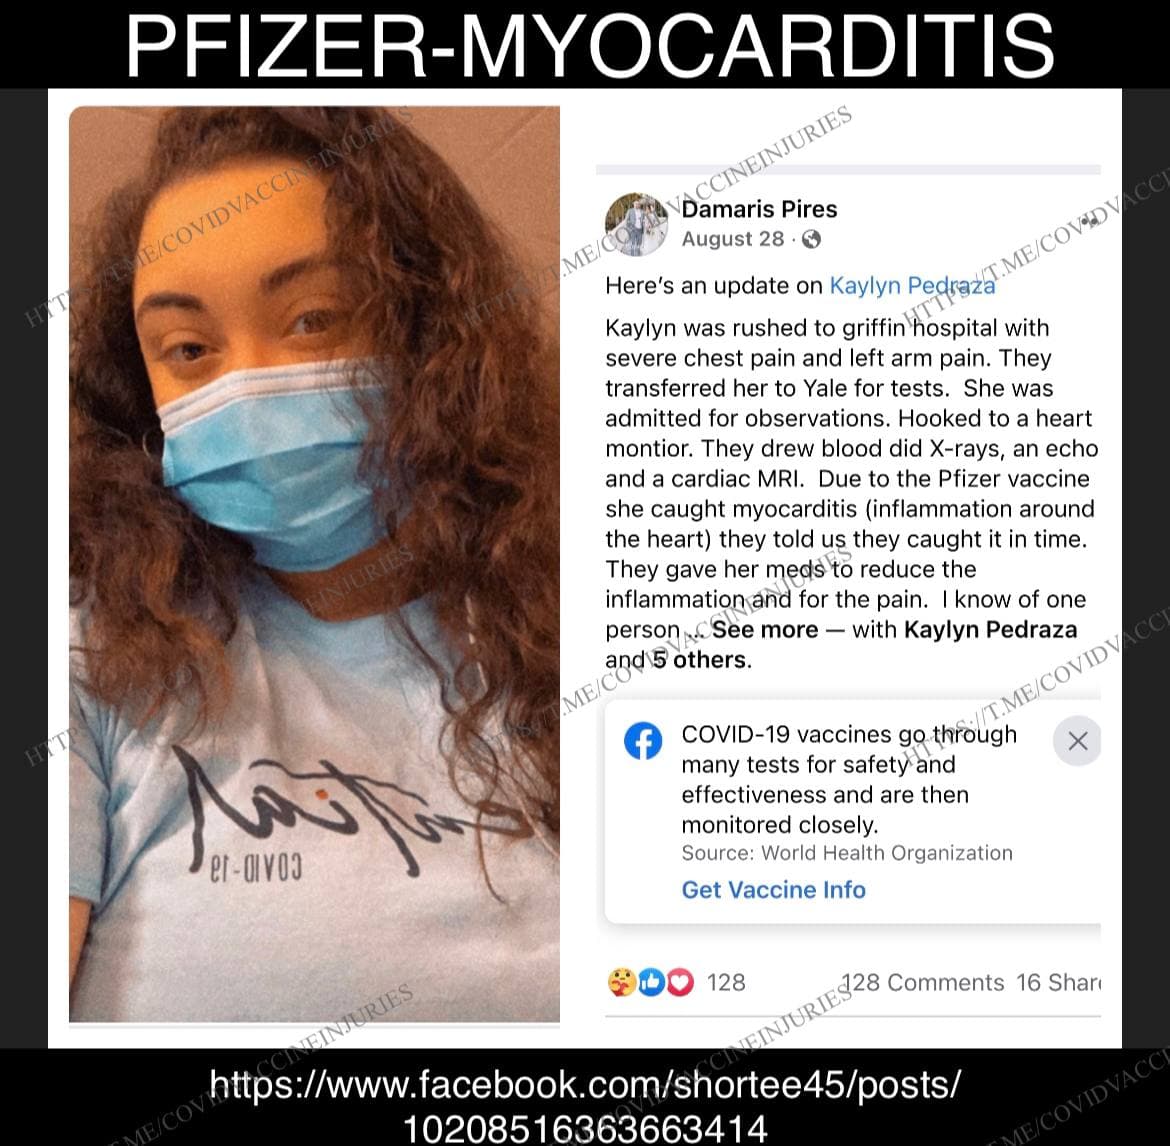  Does Pfizer Now Control the CDC and FDA? Dararis-Pires